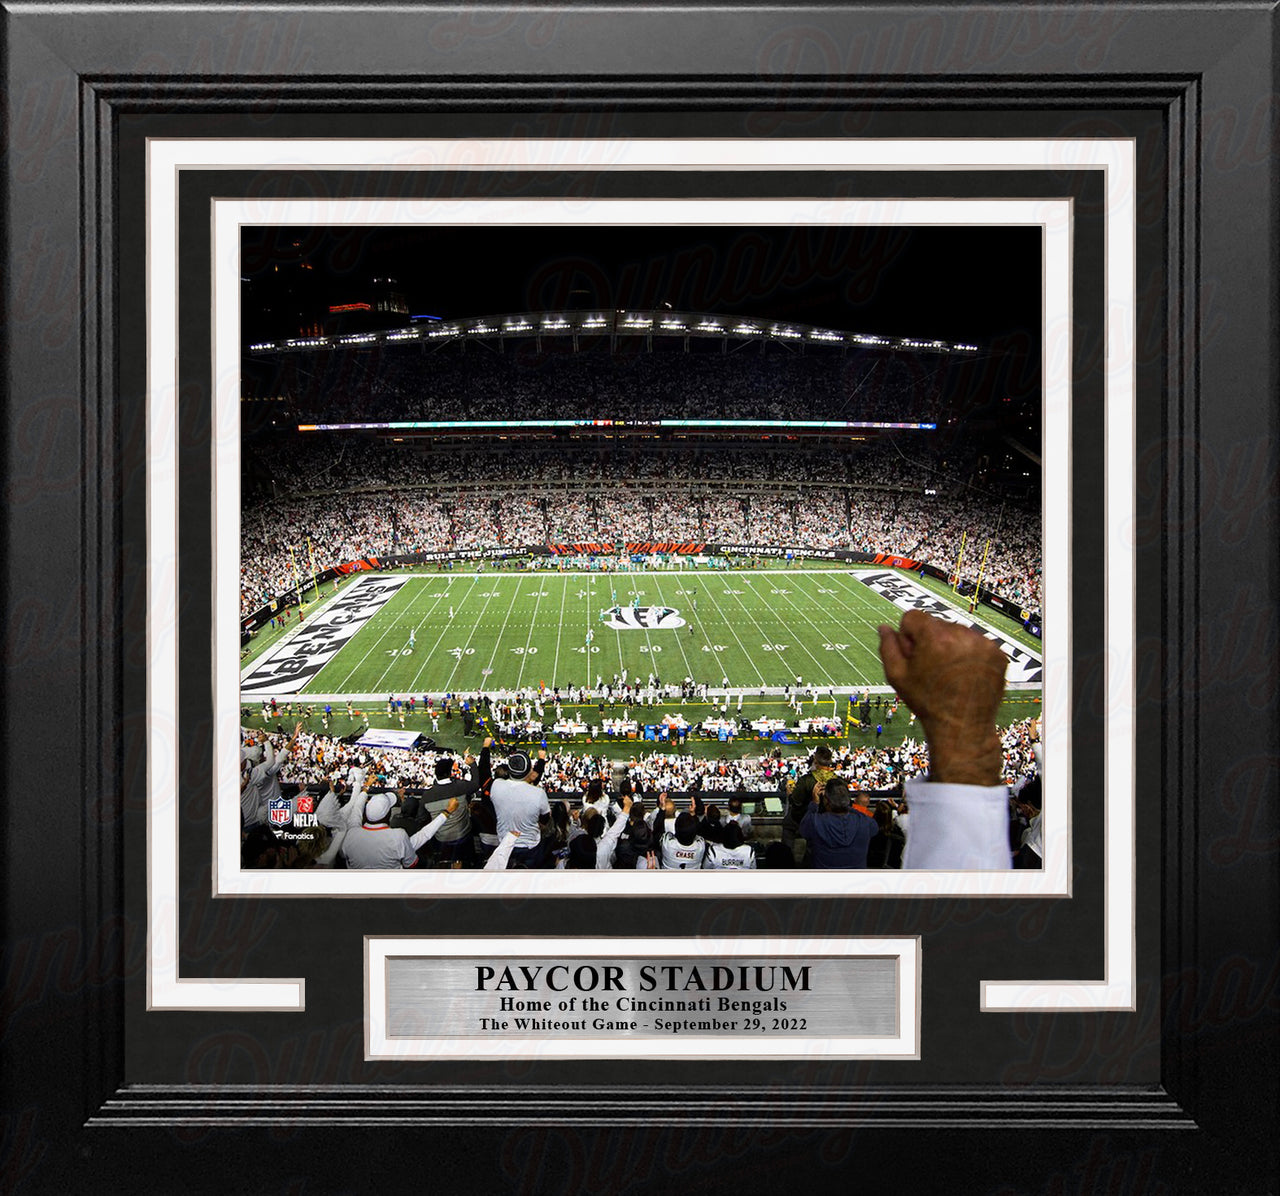 Cincinnati Bengals Paycor Stadium White-Out Game 8" x 10" Framed Football Photo - Dynasty Sports & Framing 